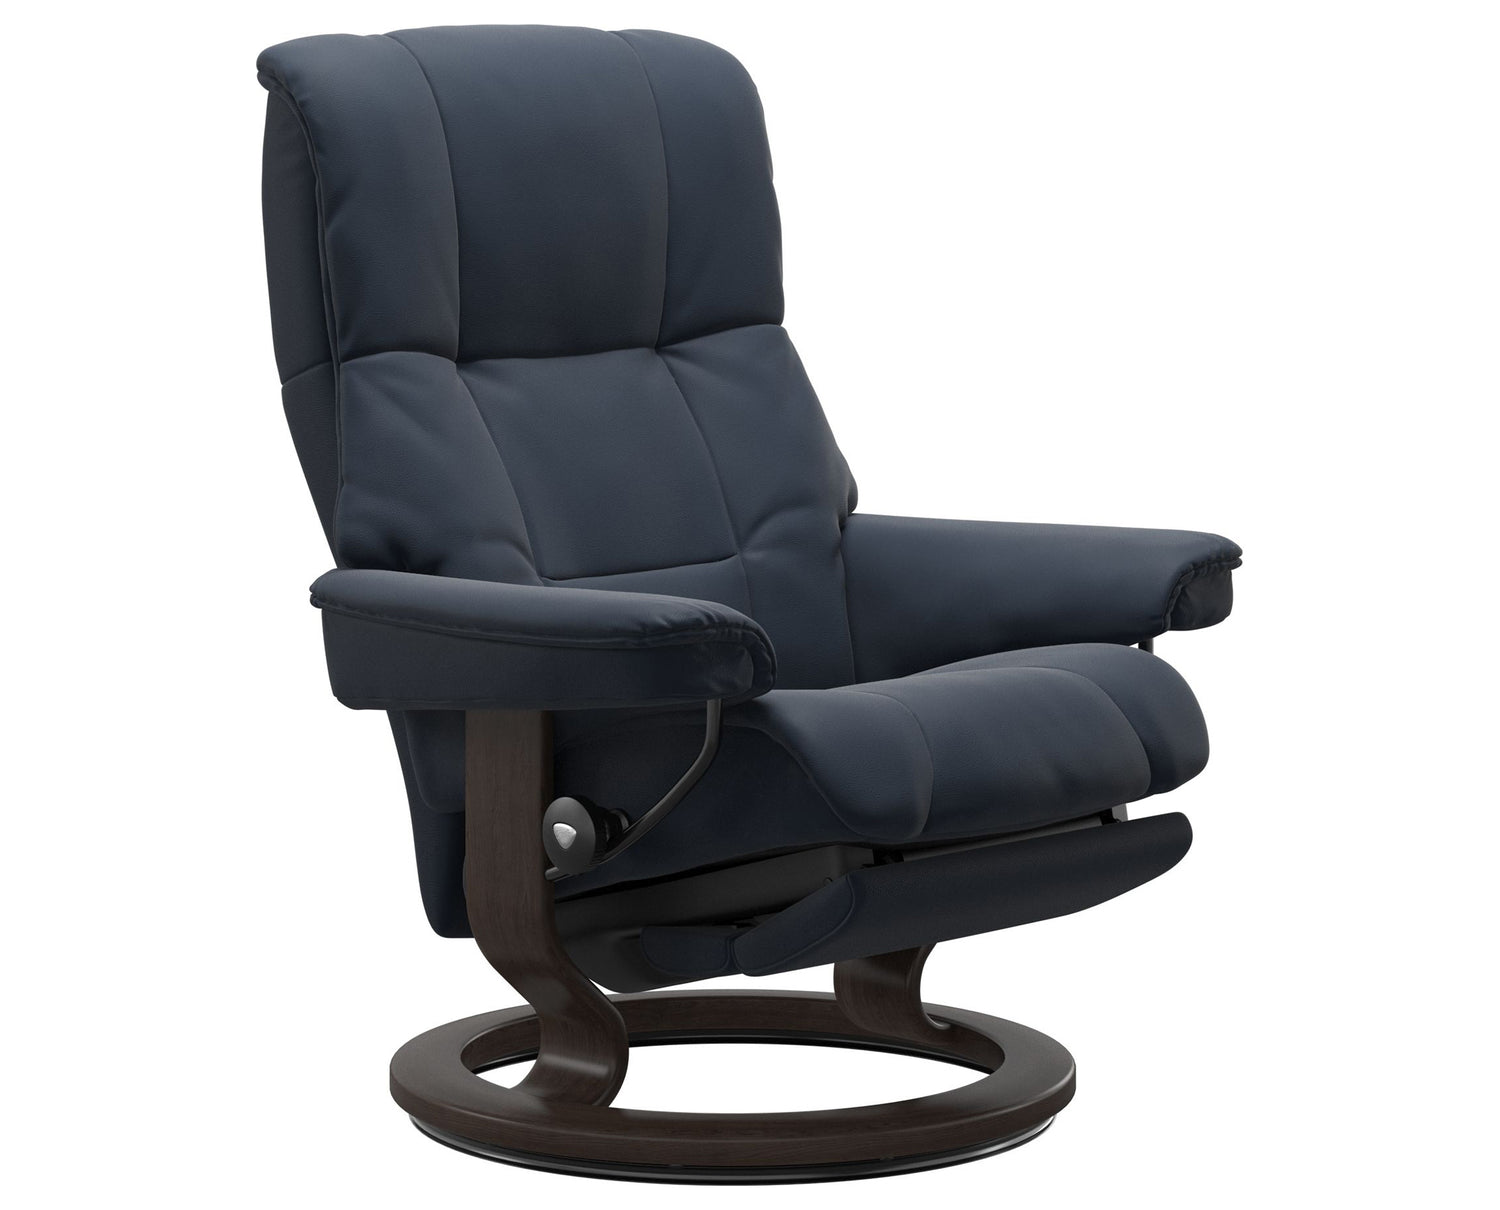 Paloma Leather Oxford Blue M/L & Wenge Base | Stressless Mayfair Classic Power Recliner | Valley Ridge Furniture